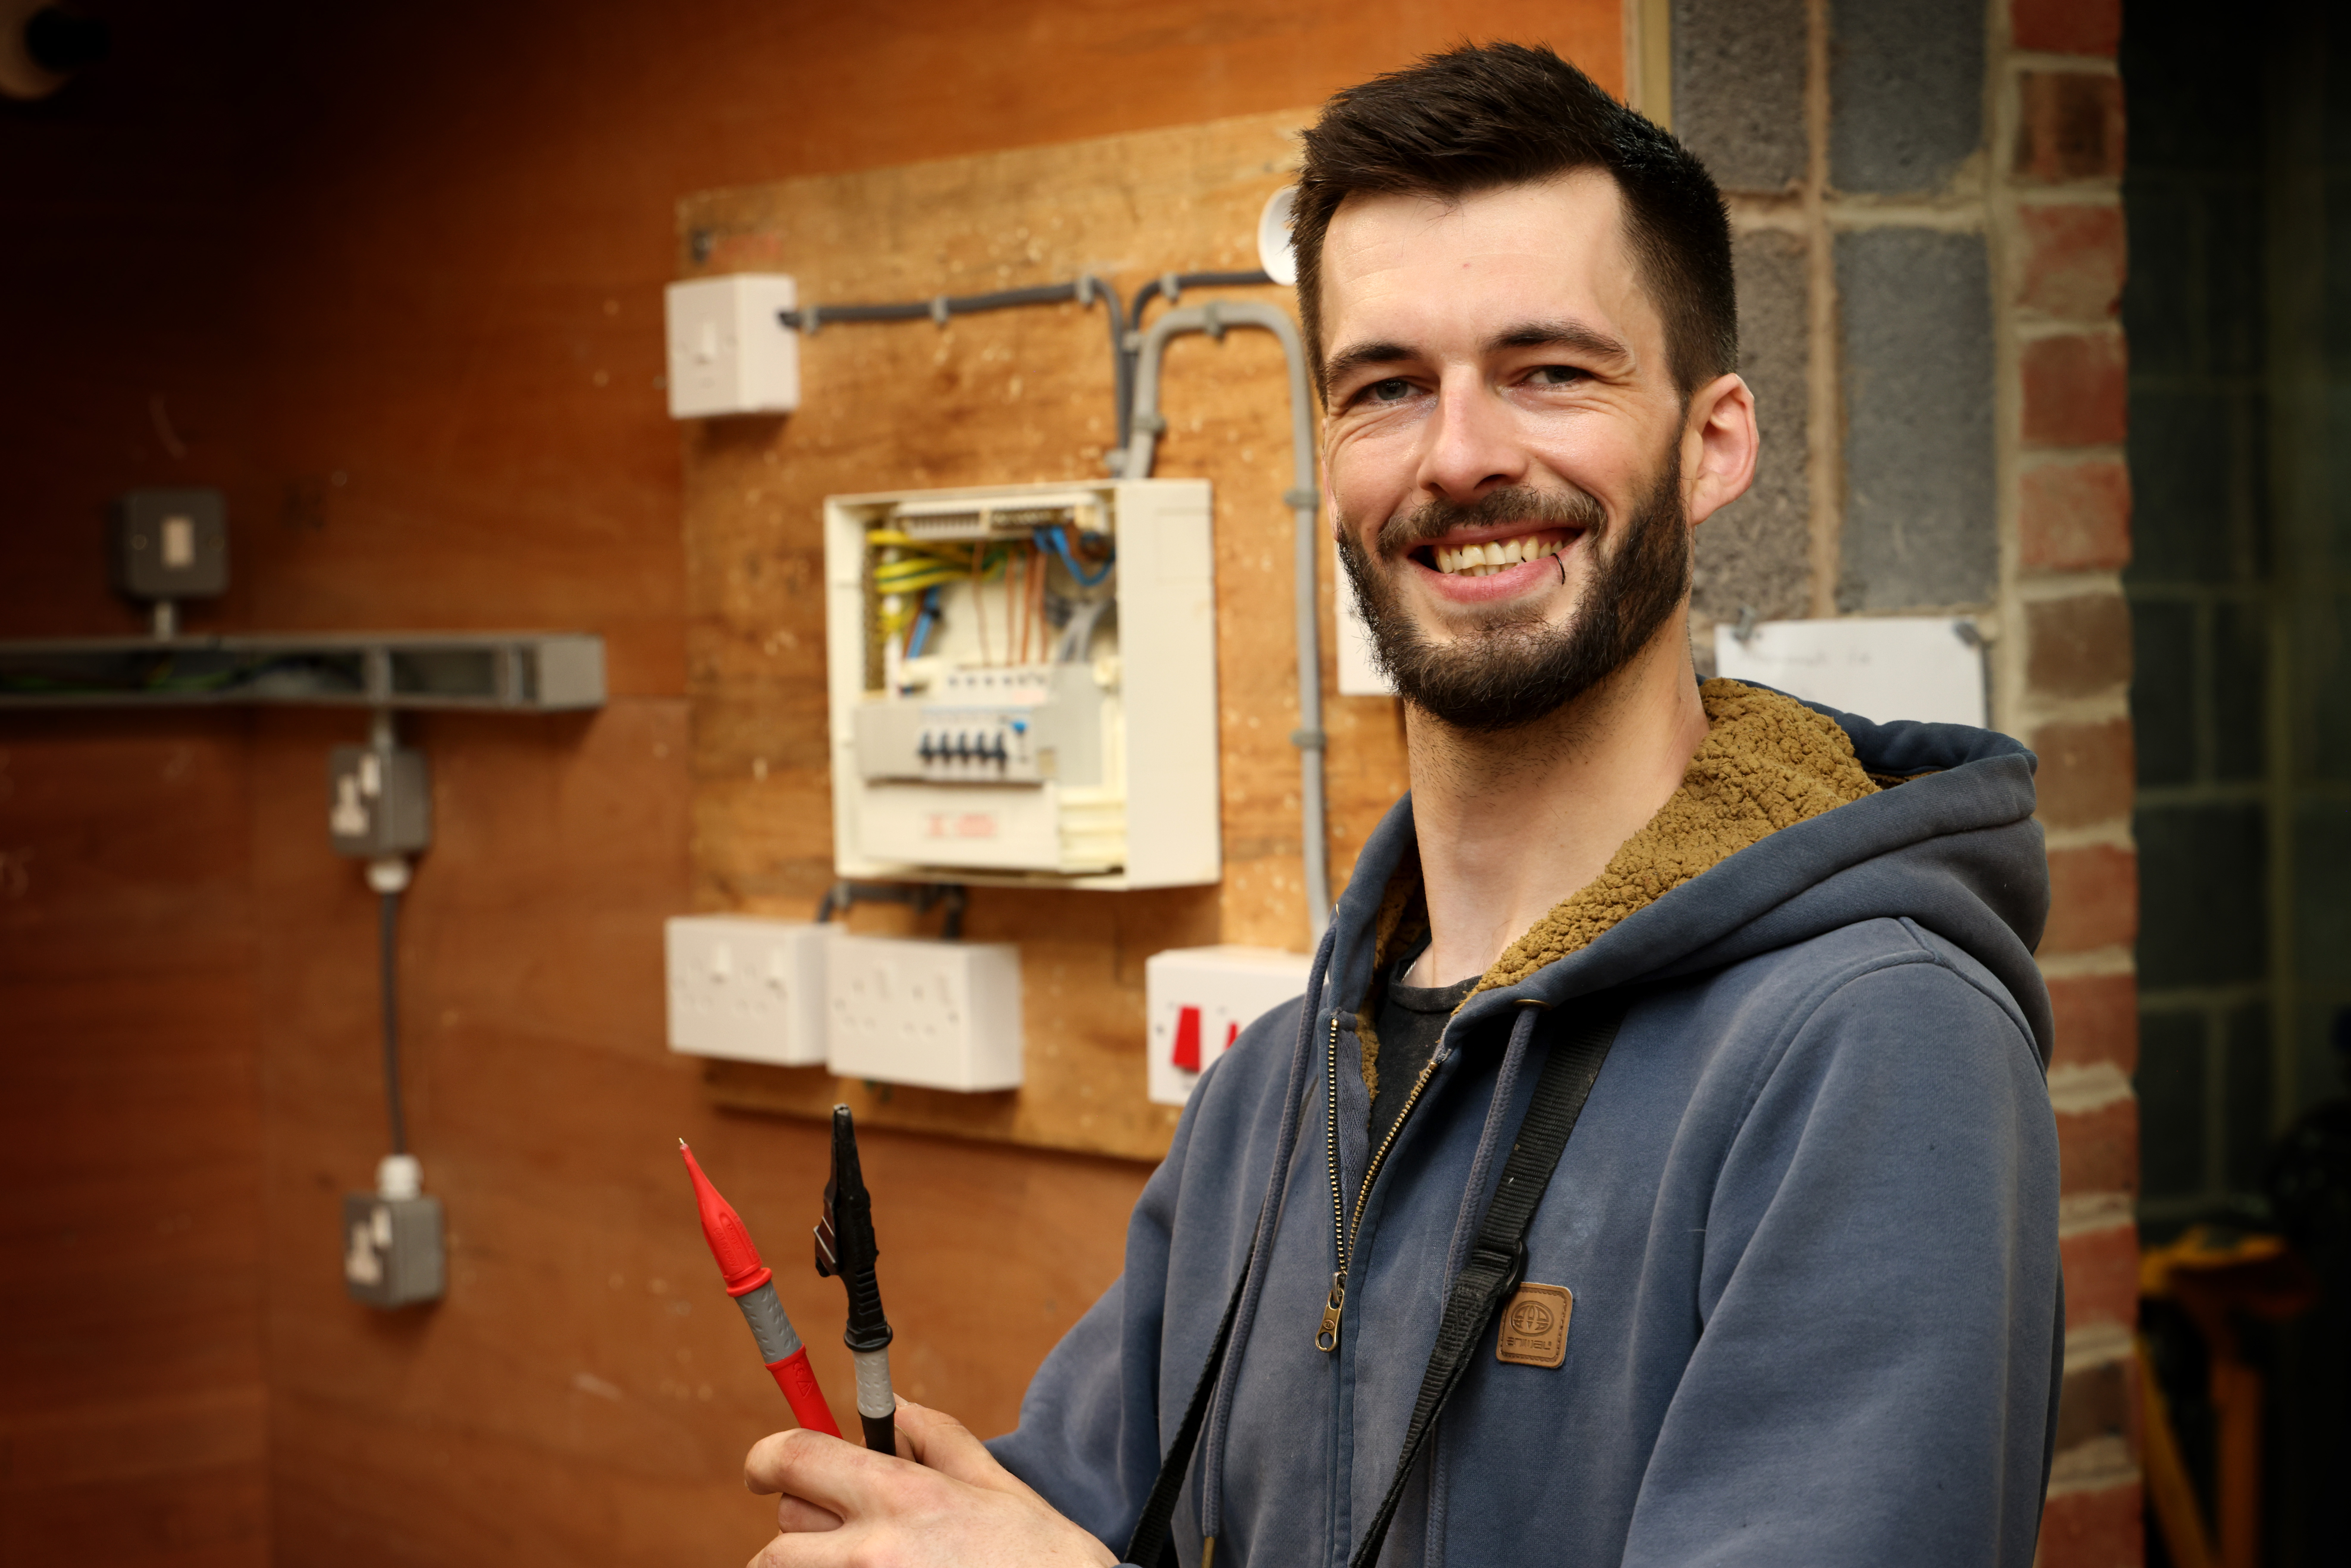 Meet Mike, Electrical Installation/Maintenance Apprentice at JLEC Electrical